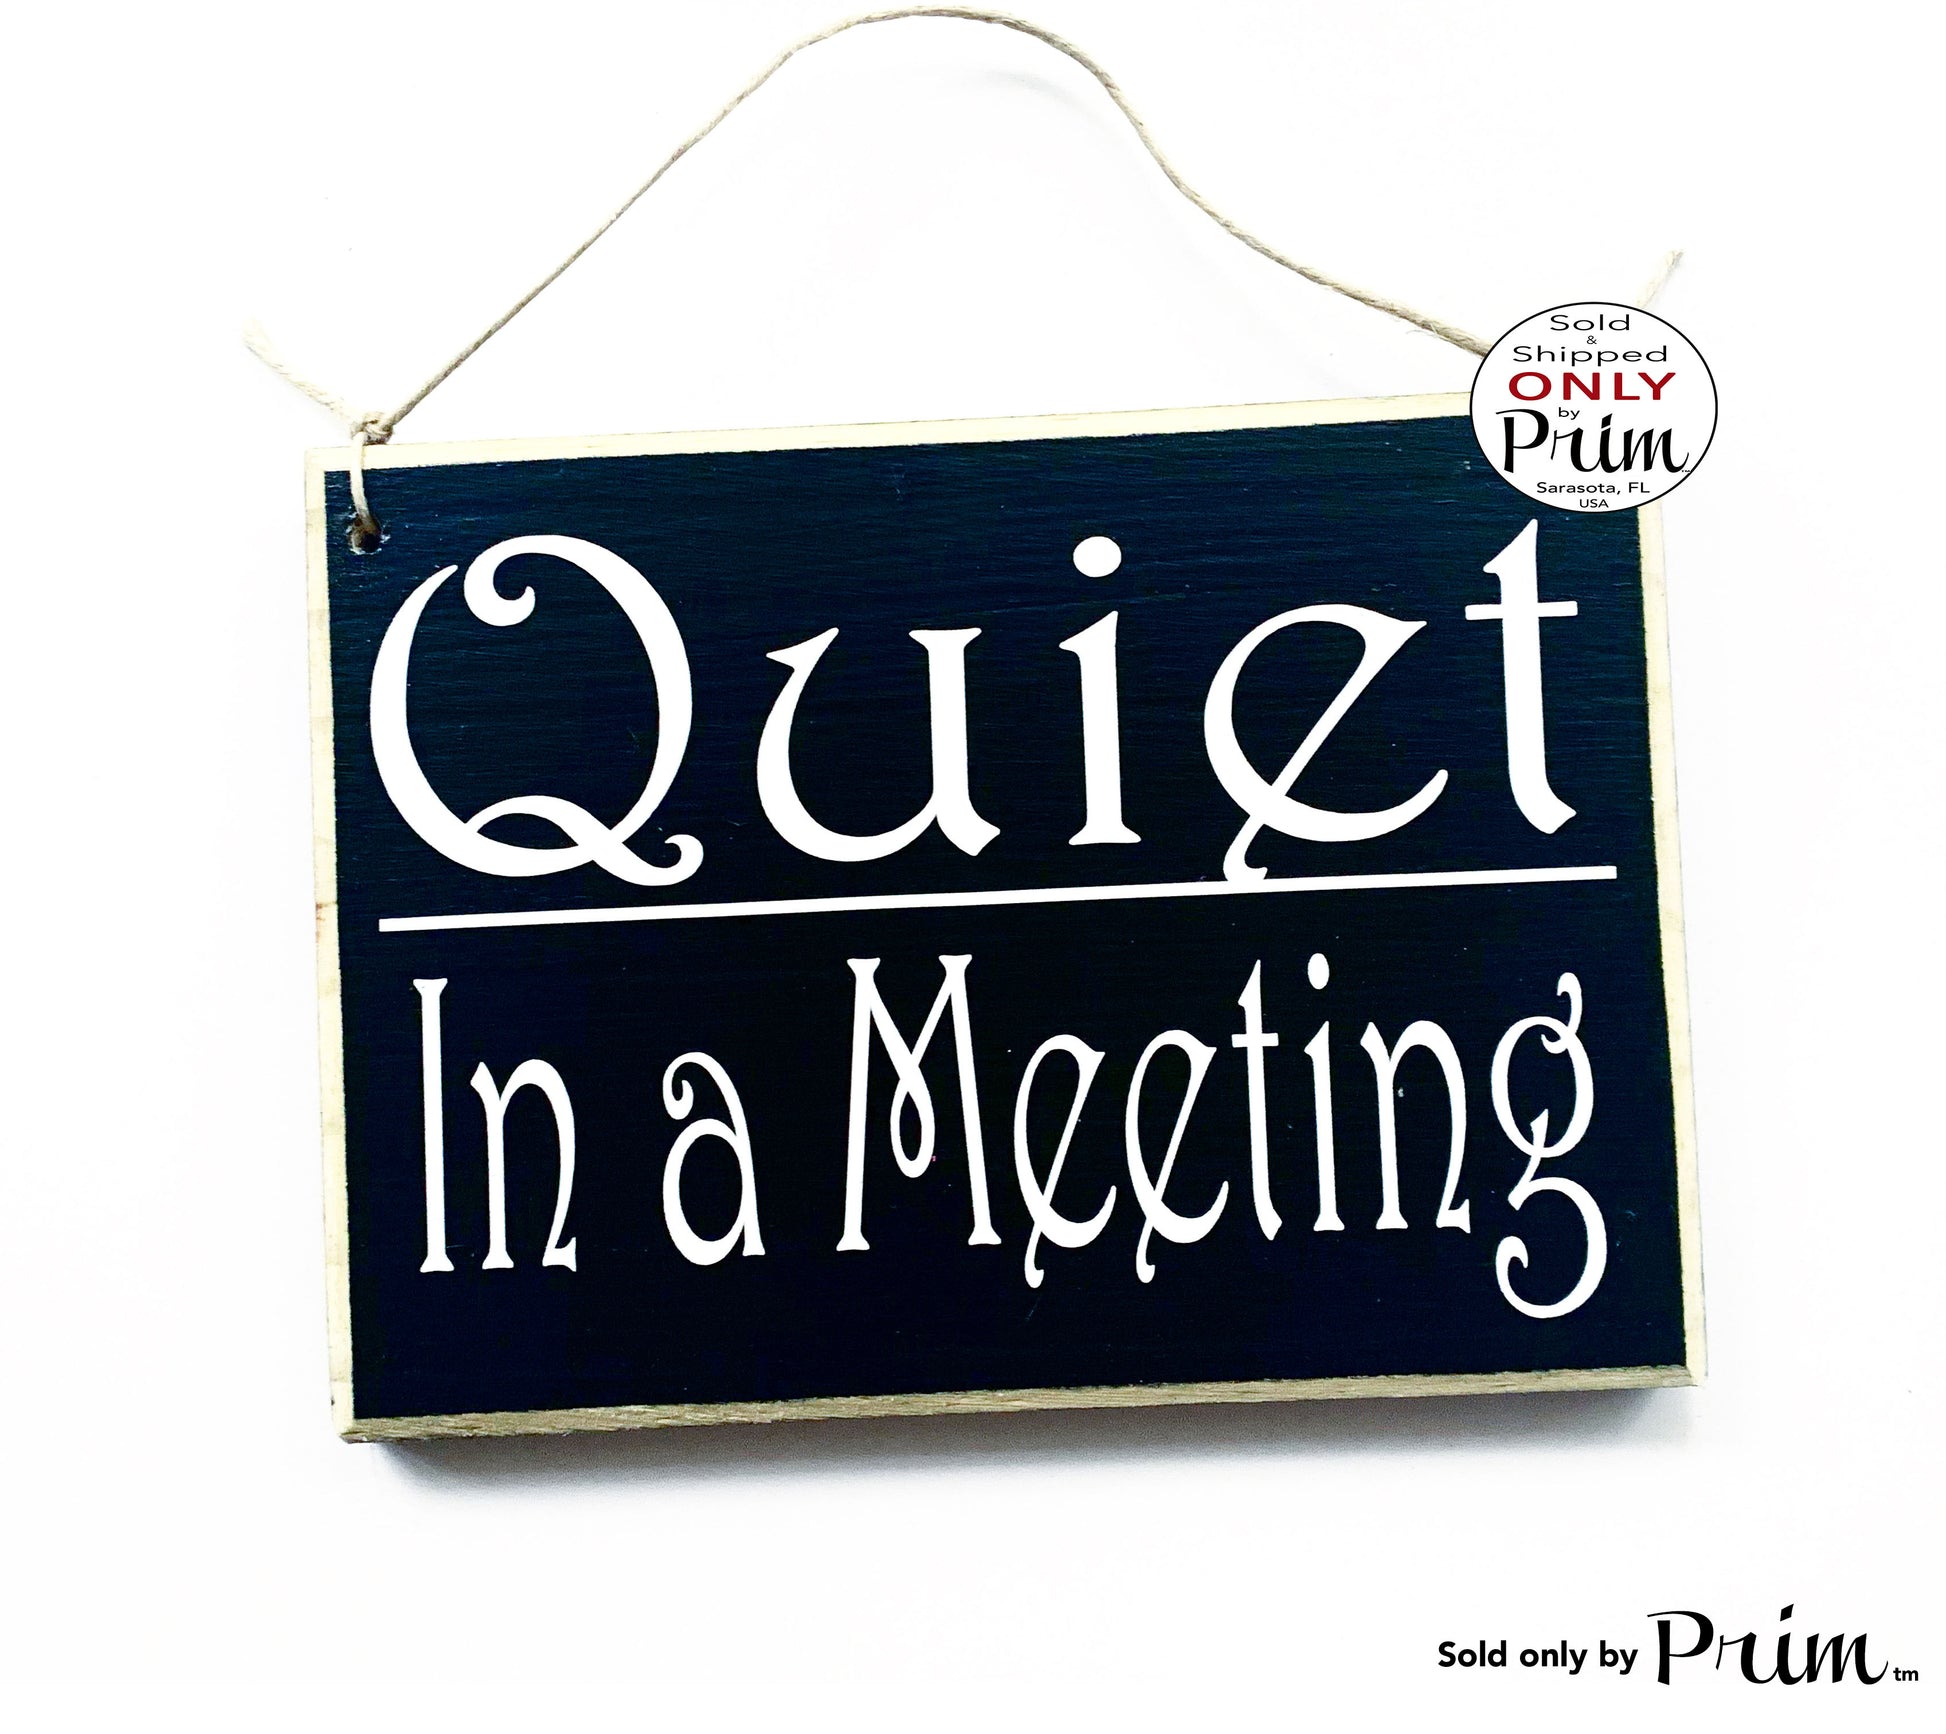 8x6 Quiet In a Meeting Custom Wood Sign Please Do Not Disturb The Zone Welcome In Session Progress Conference Office Workspace Door Plaque Designs by Prim